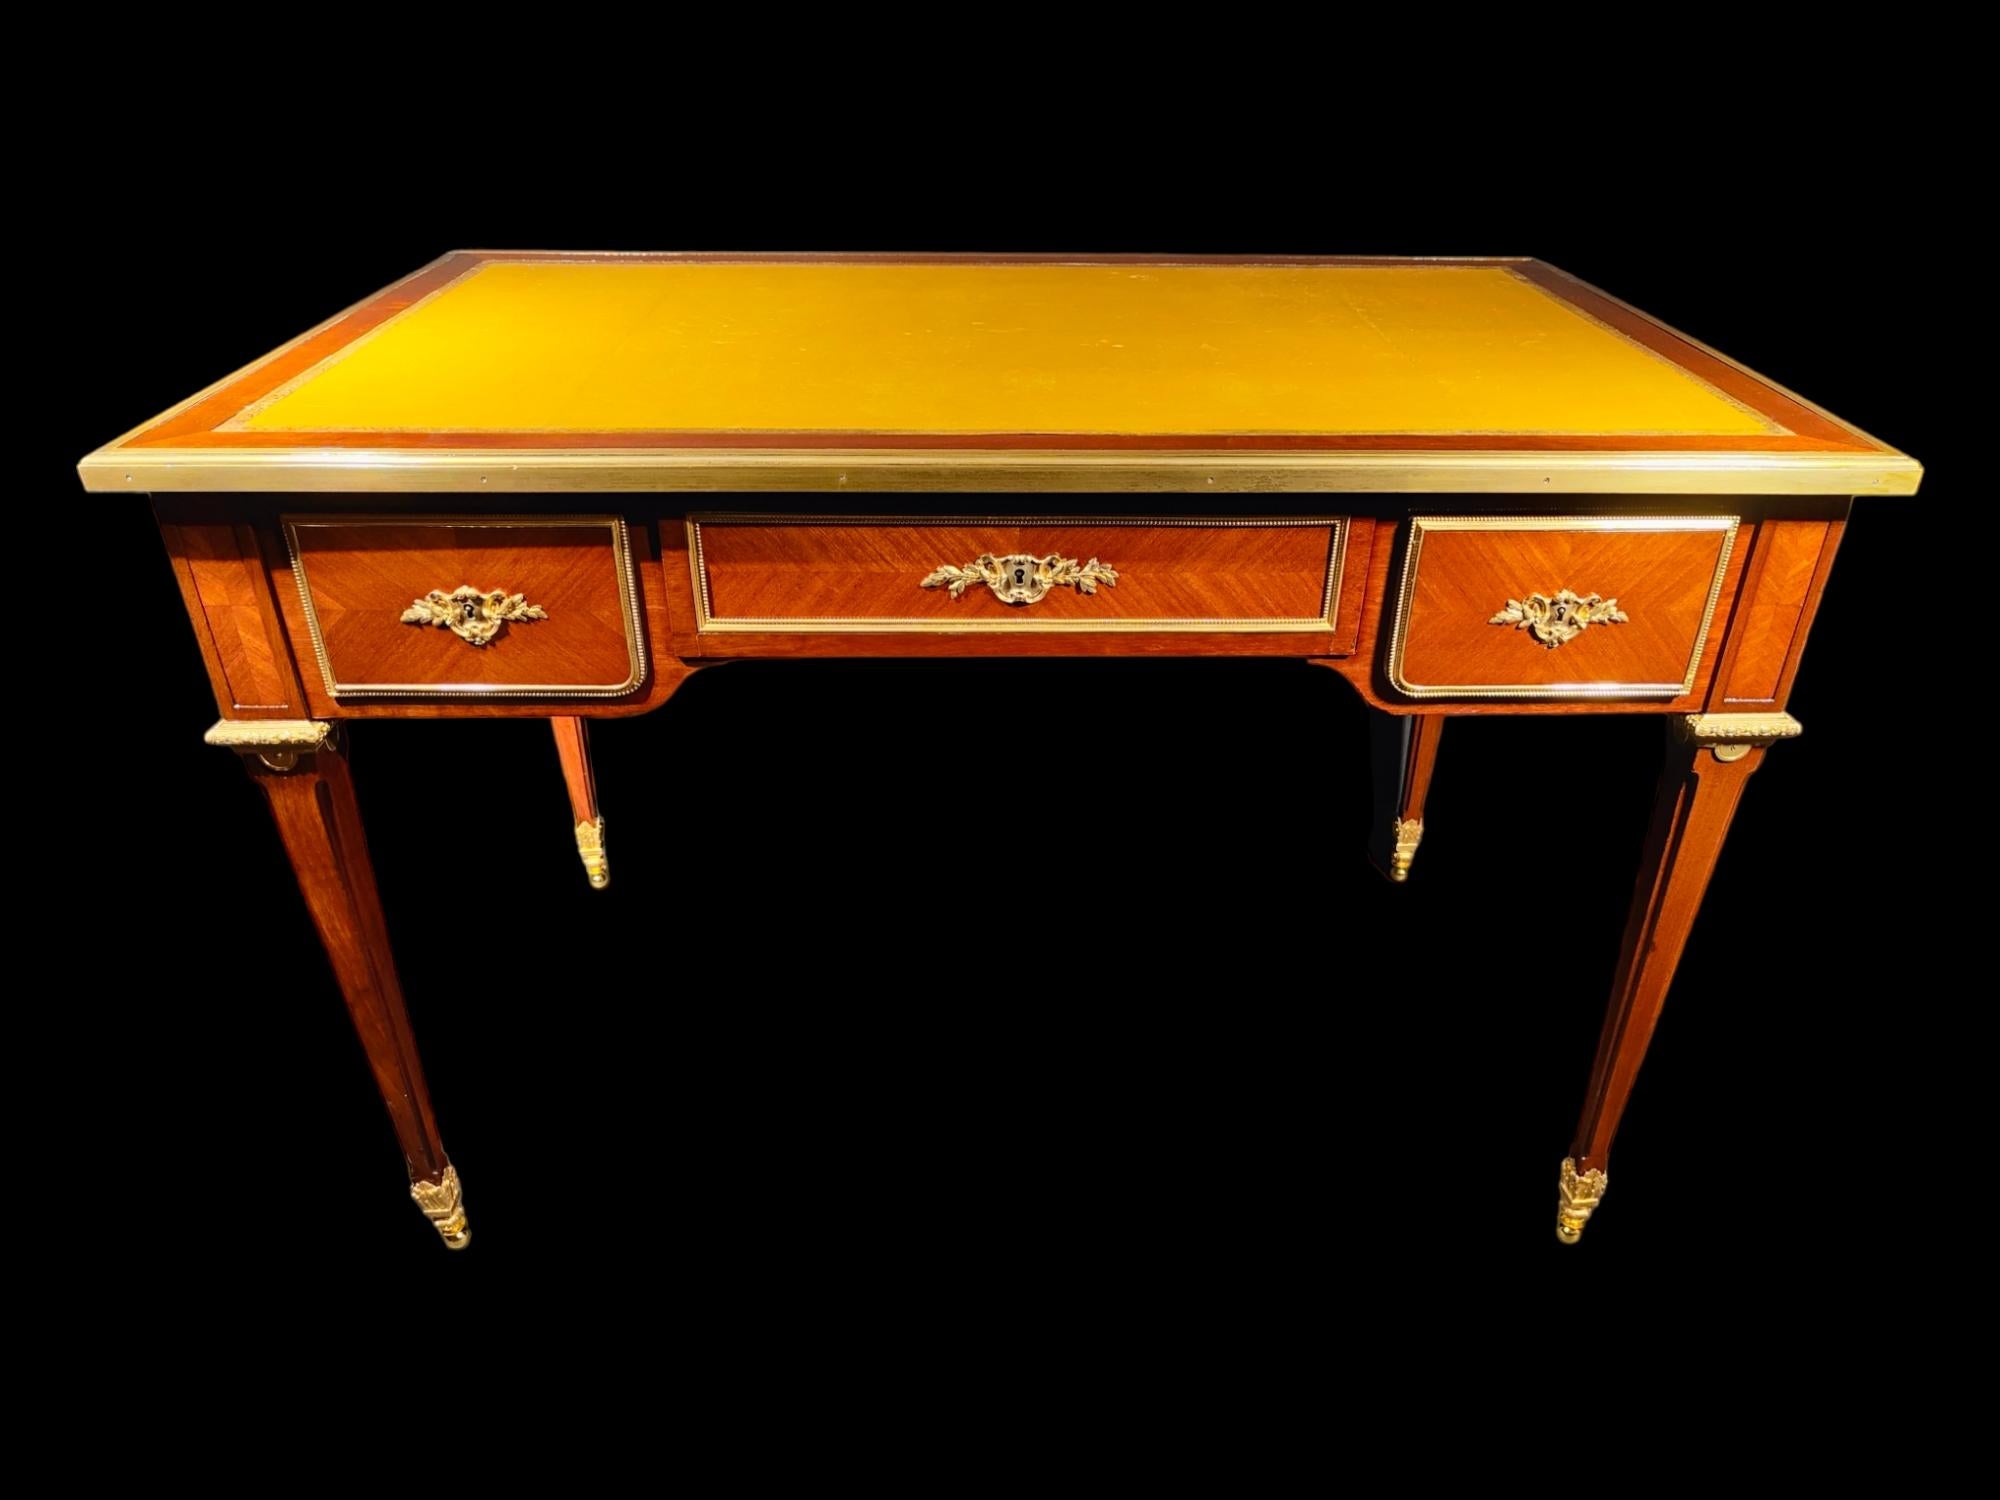 Very Fine Gilt Bronze Mounted Tulipwood and Amaranth Desk by L. Cueunieres For Sale 5